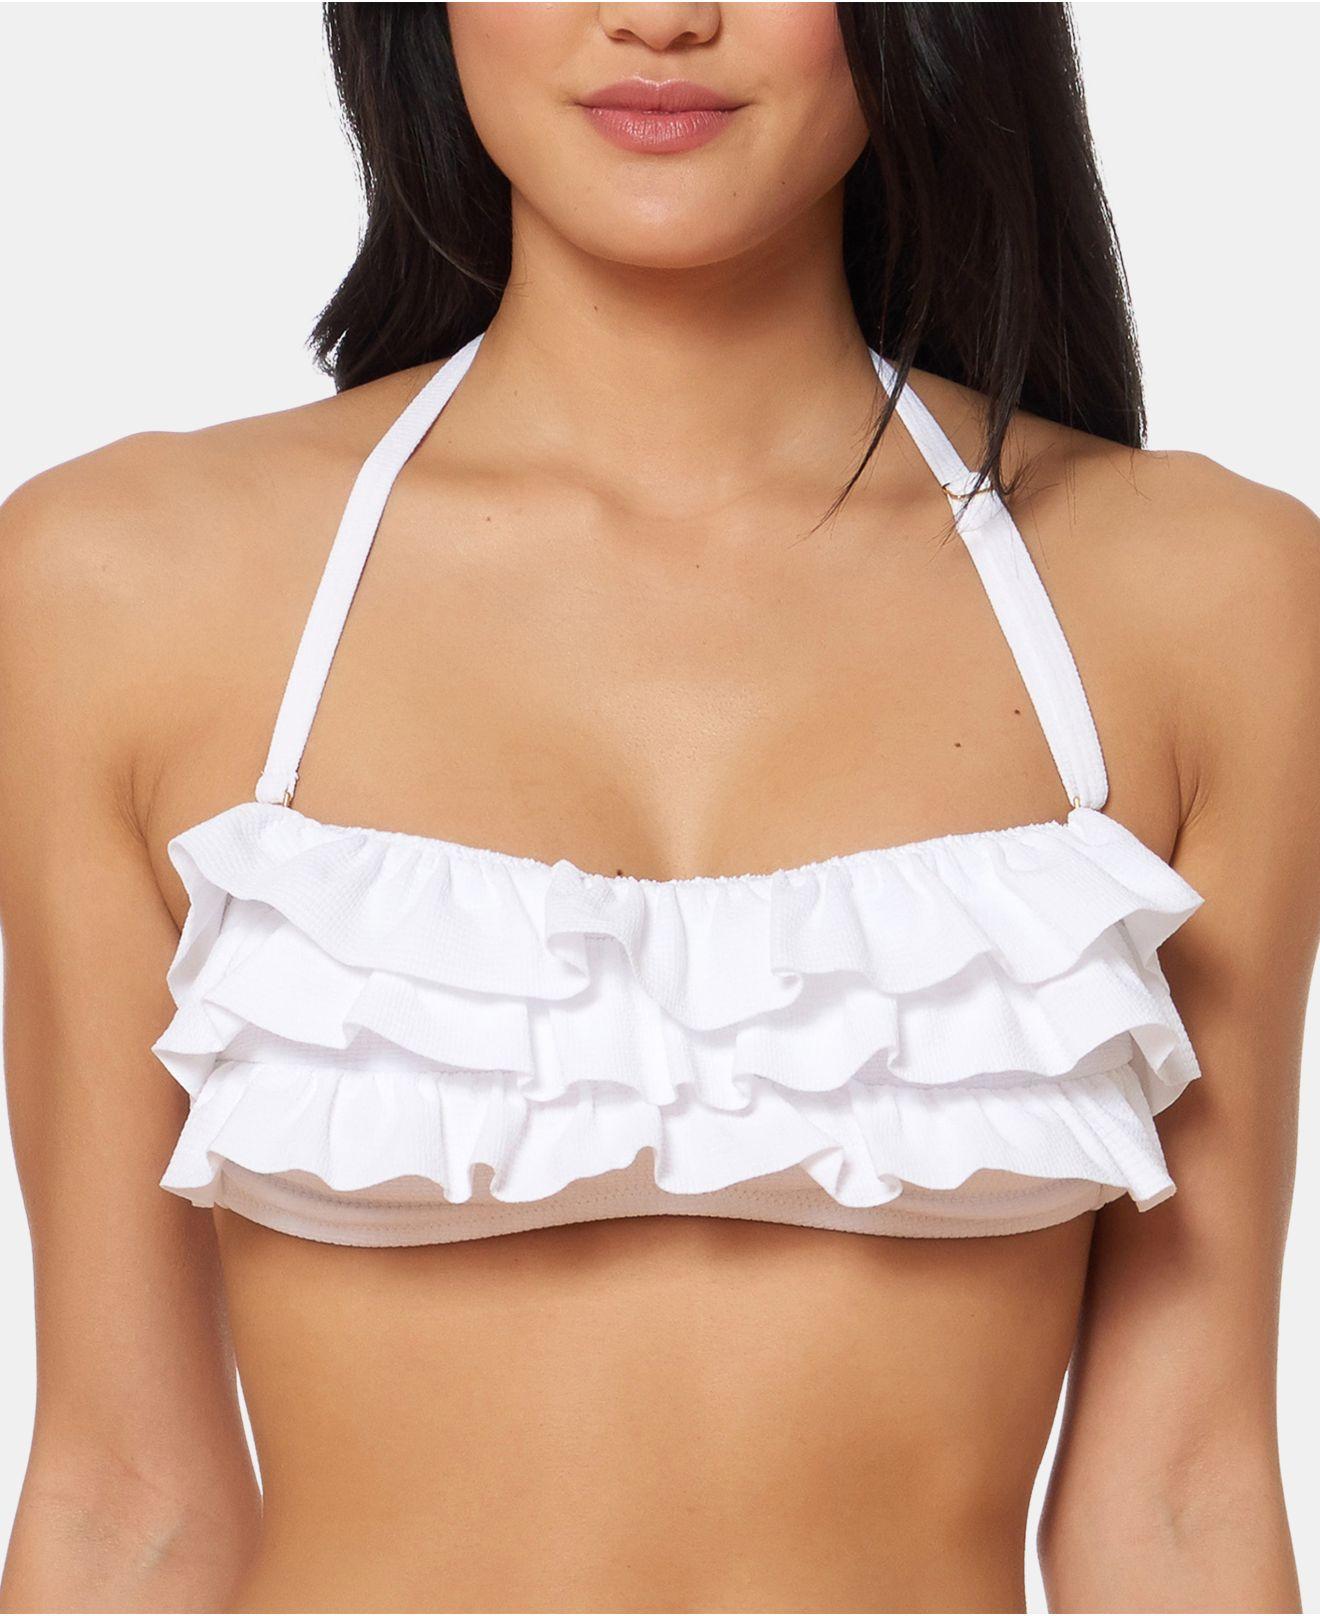 Jessica Simpson Synthetic Solid Ruffle Bandeau Bikini Top in White - Lyst